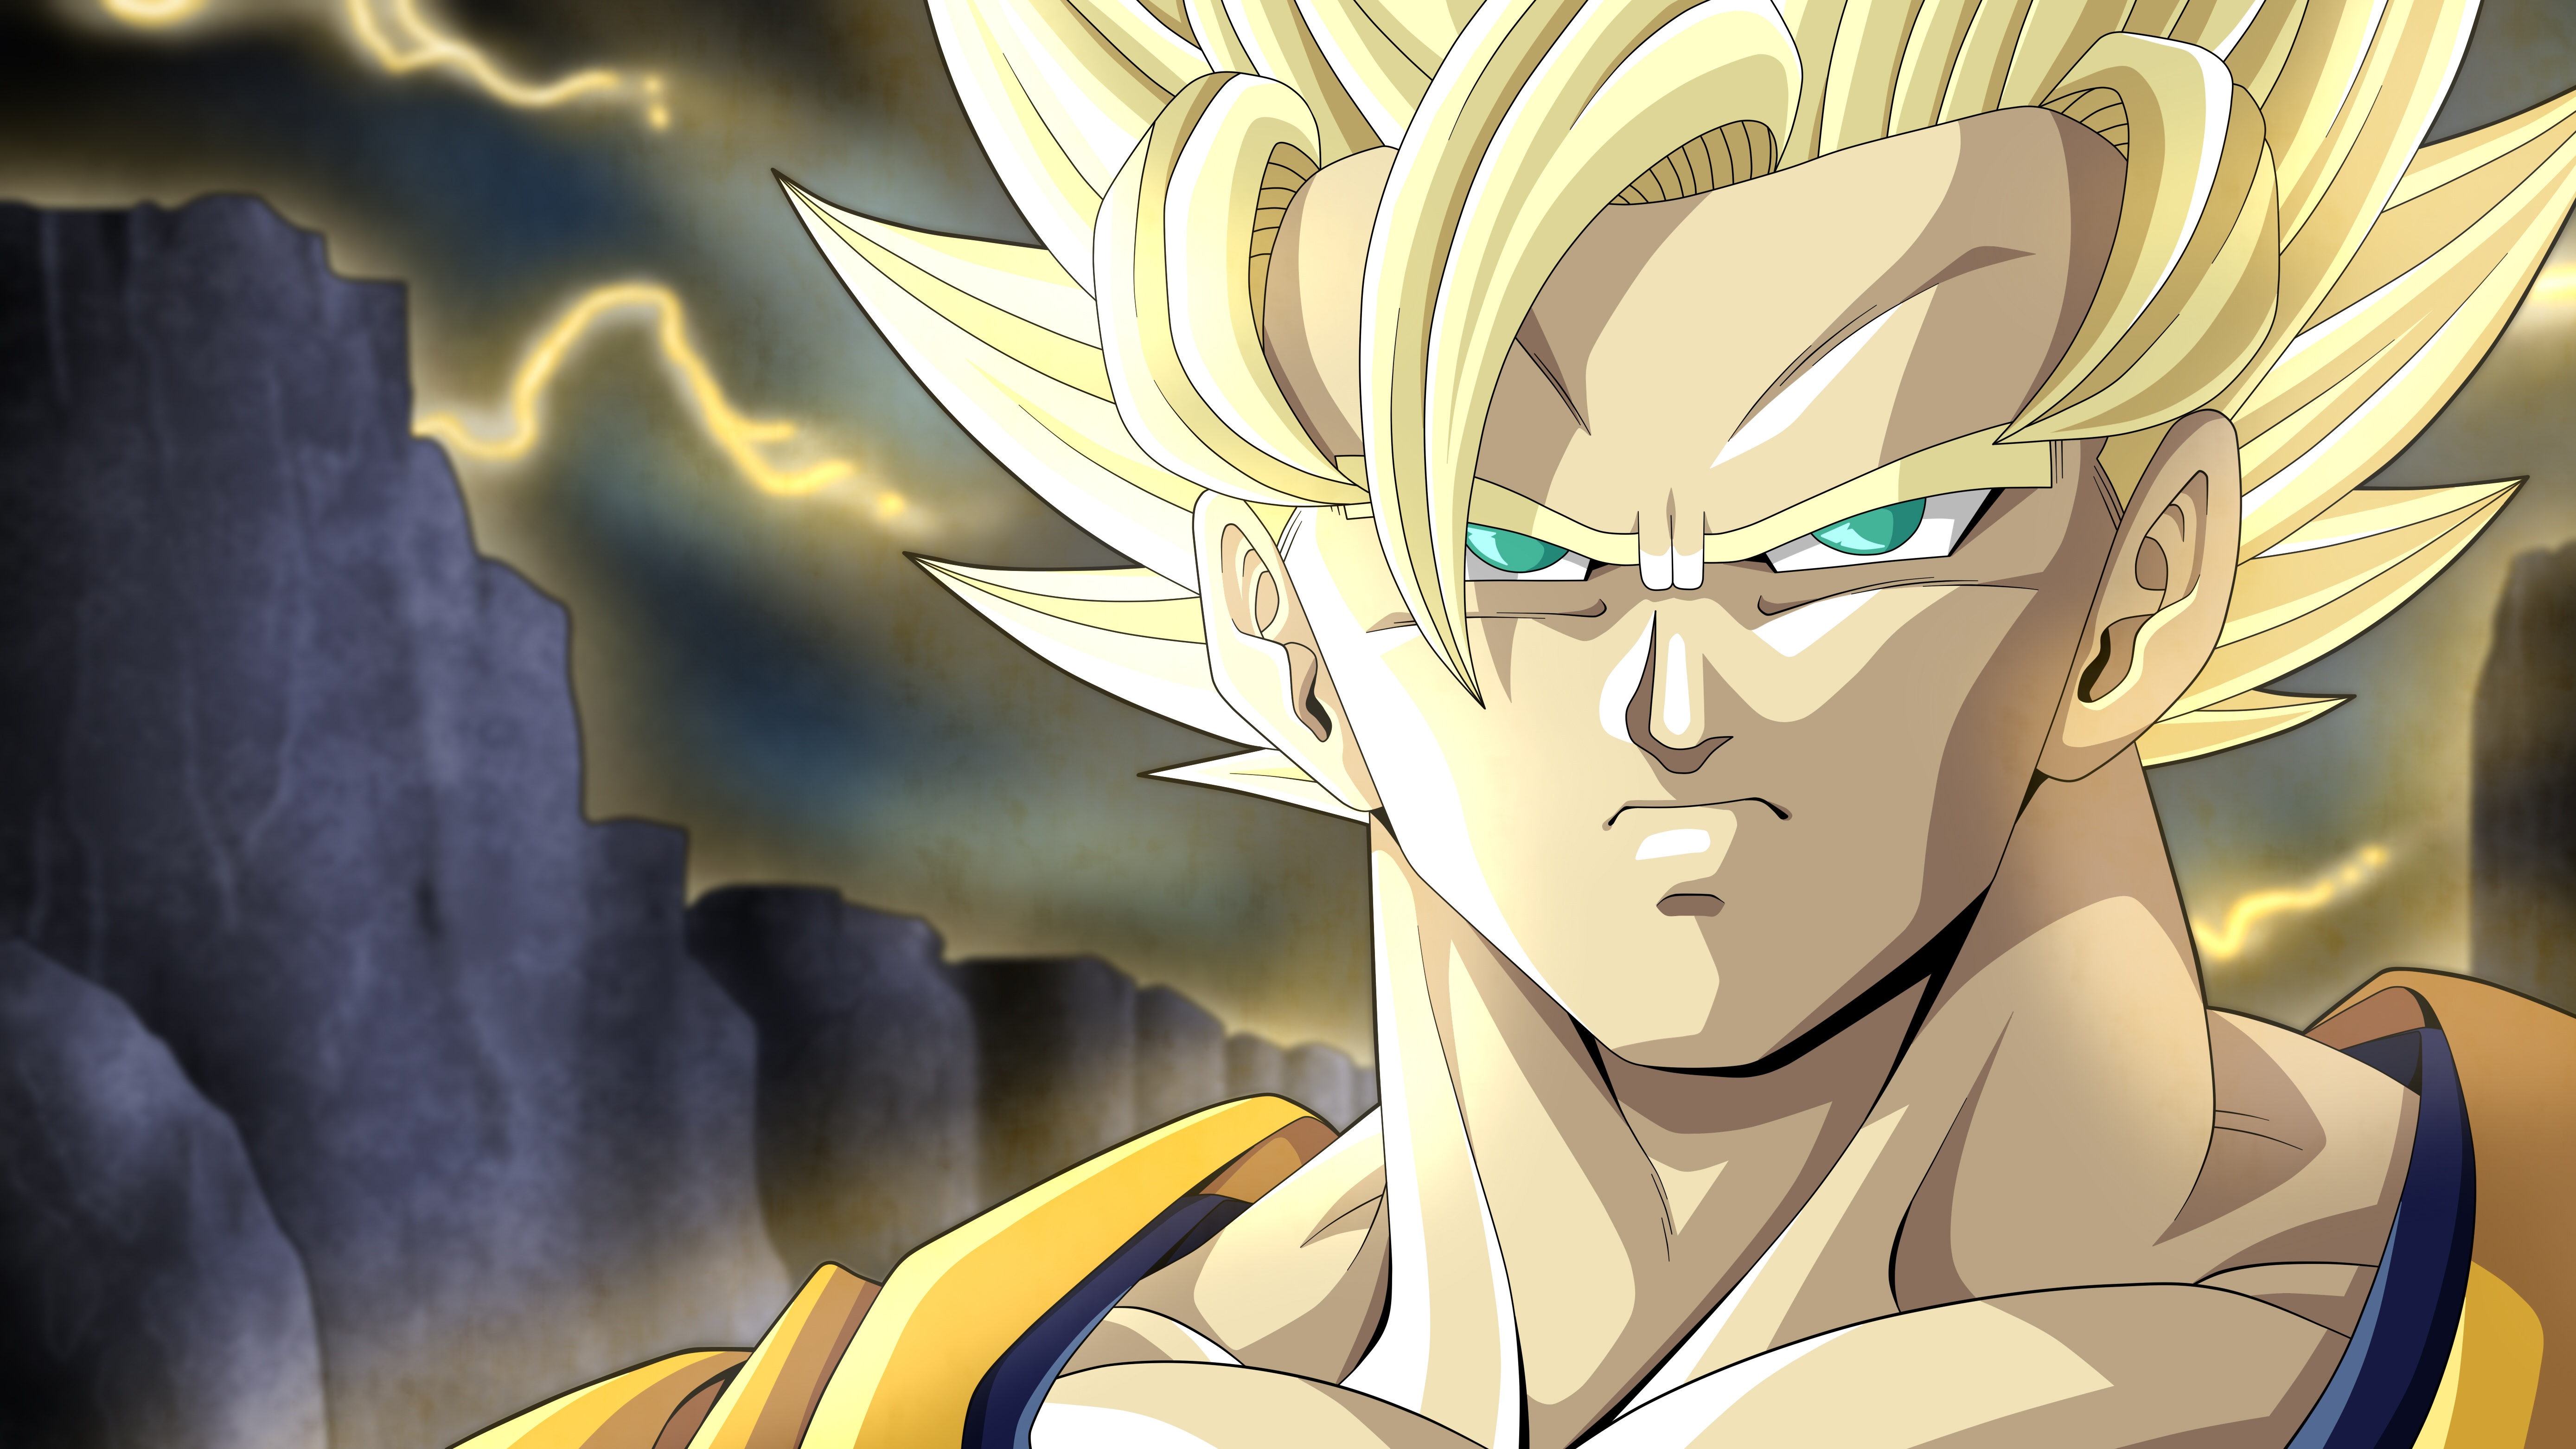 Dragon Ball Z 4k, HD Anime, 4k Wallpapers, Images, Backgrounds